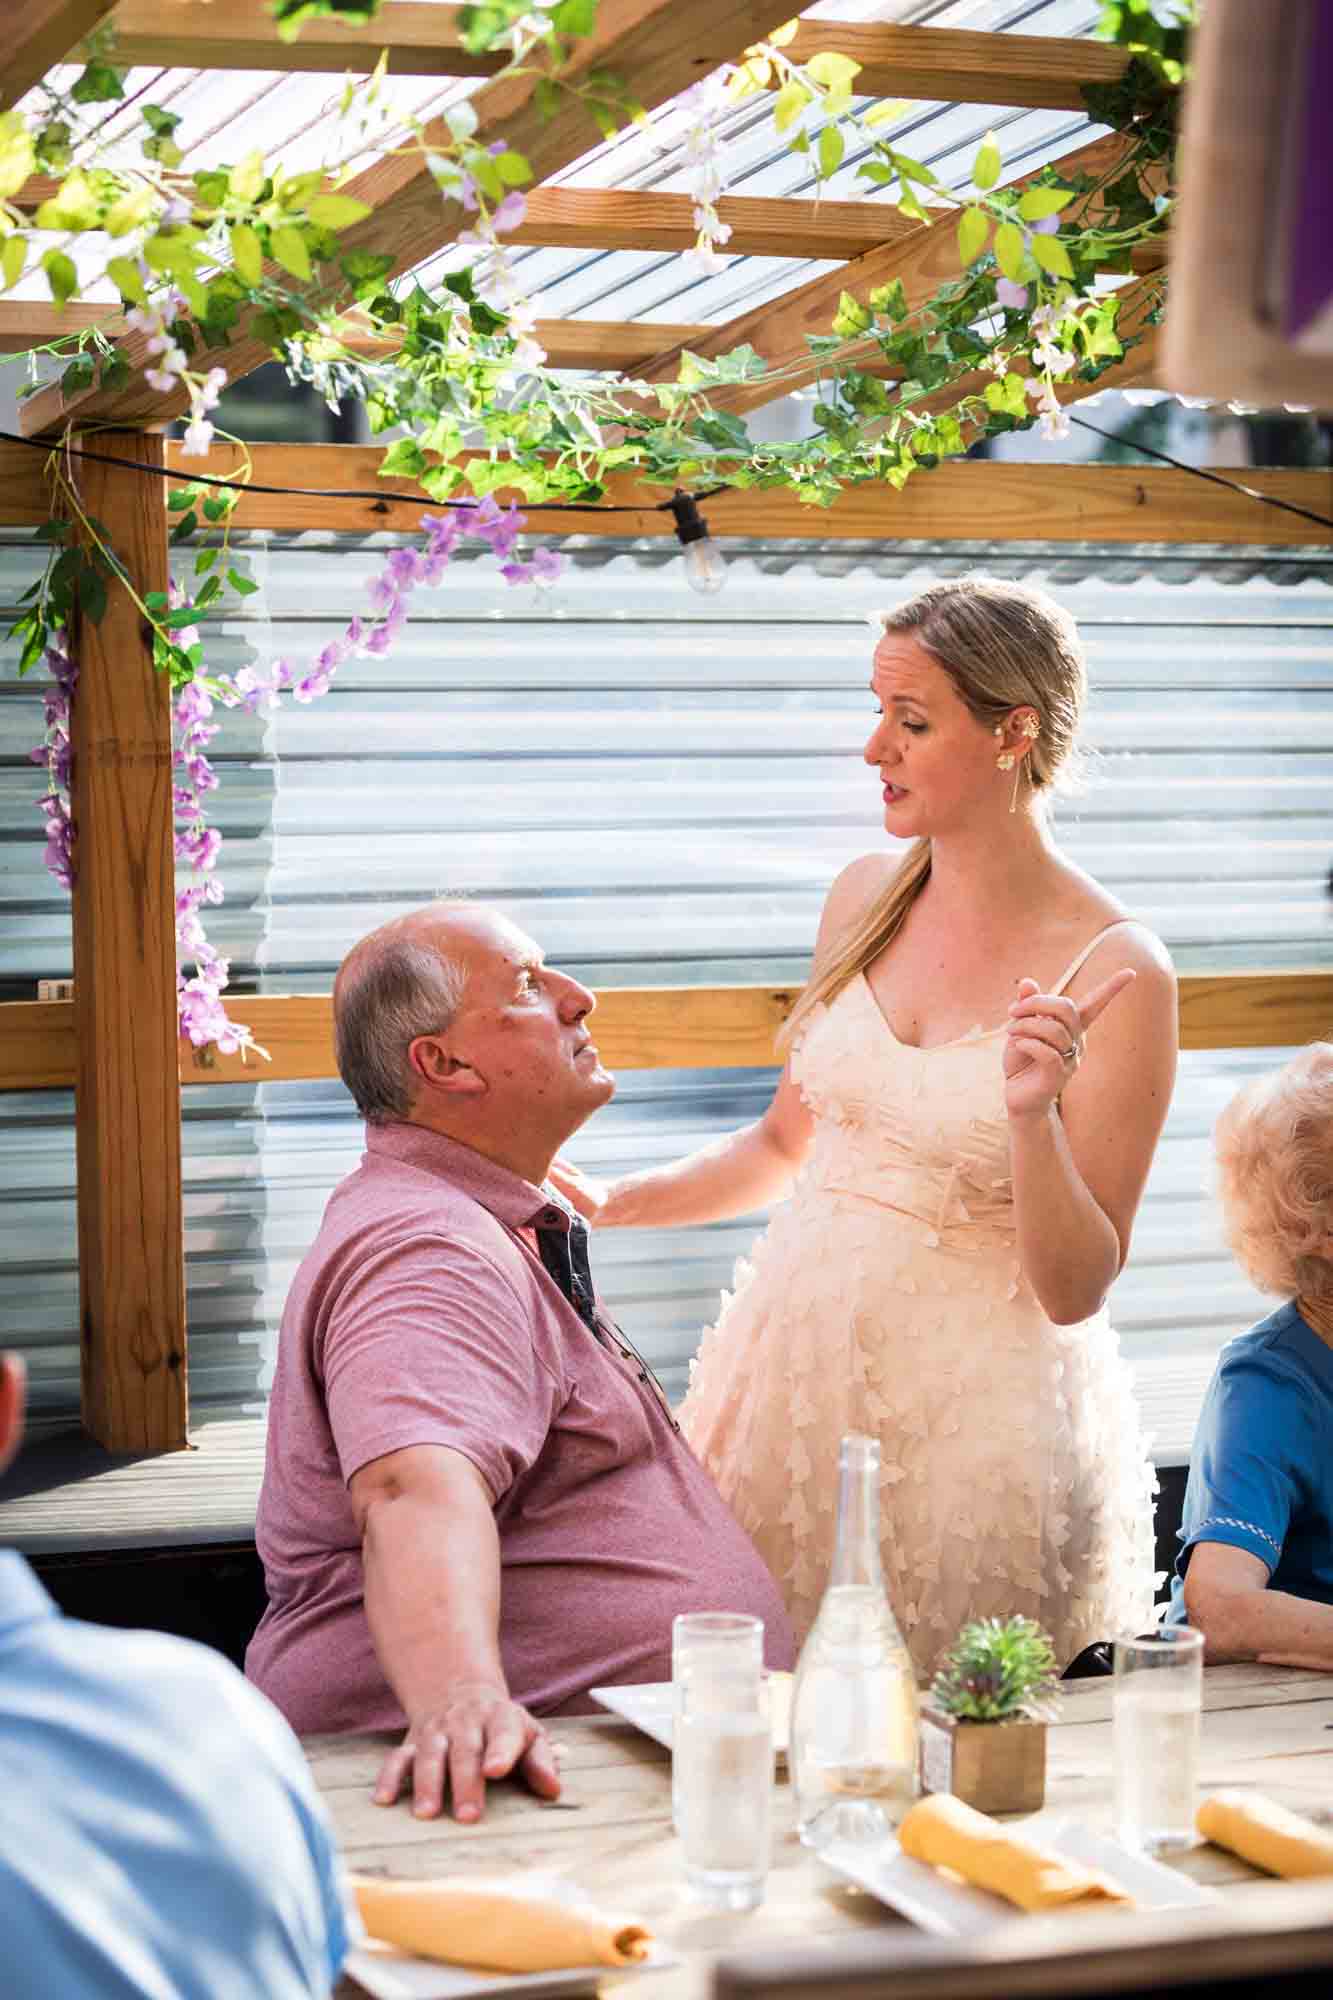 Bride talking with father at outdoor restaurant during rehearsal dinner